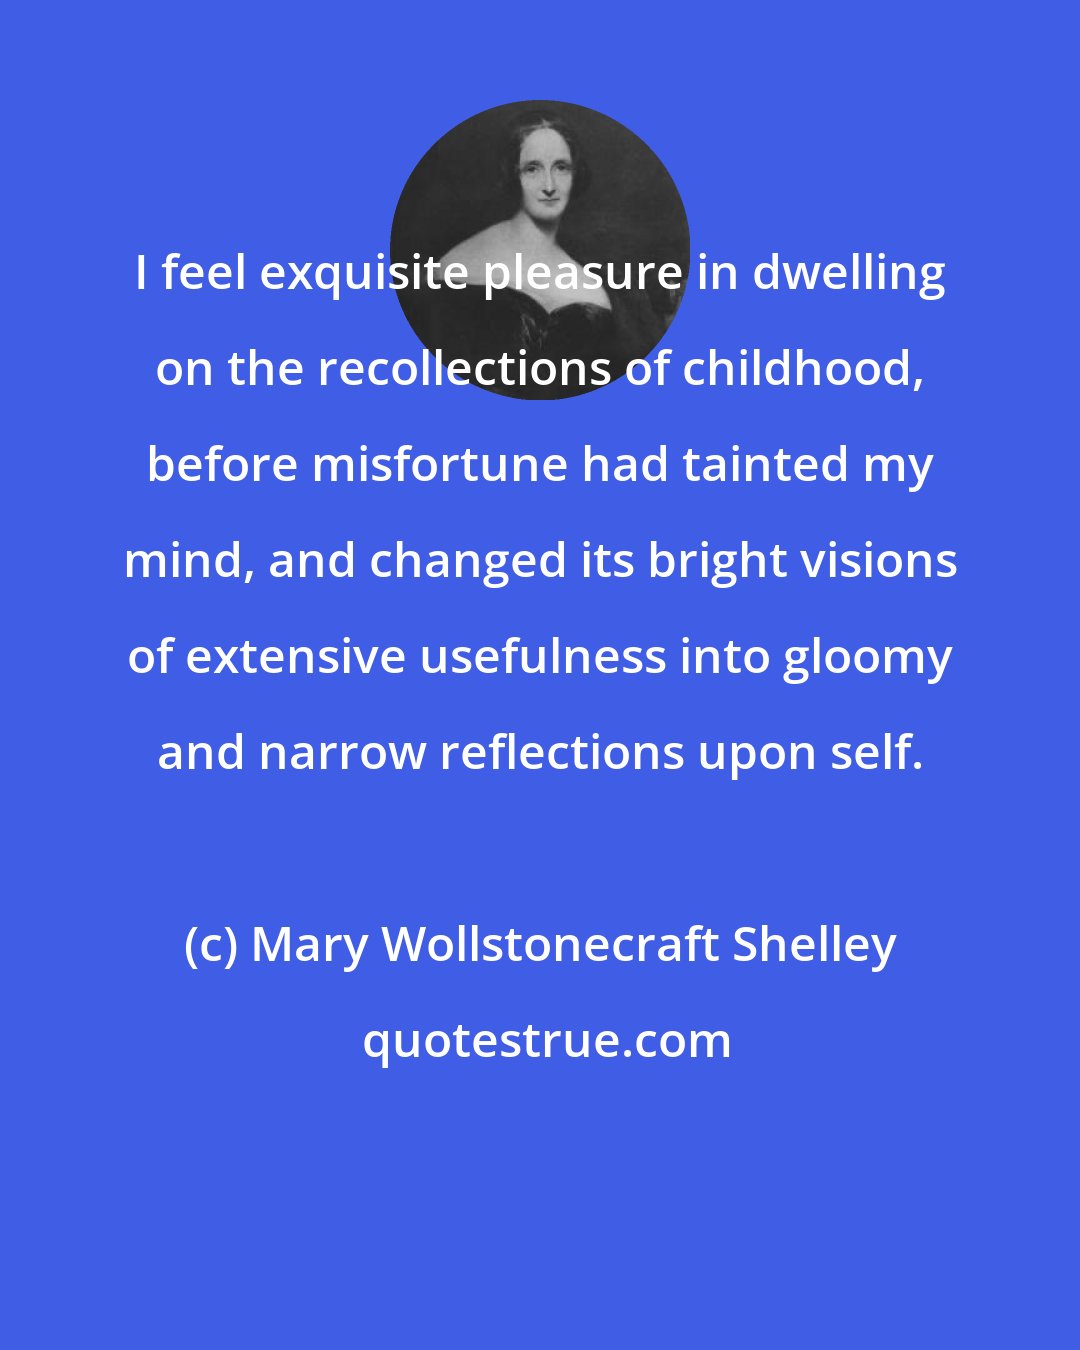 Mary Wollstonecraft Shelley: I feel exquisite pleasure in dwelling on the recollections of childhood, before misfortune had tainted my mind, and changed its bright visions of extensive usefulness into gloomy and narrow reflections upon self.